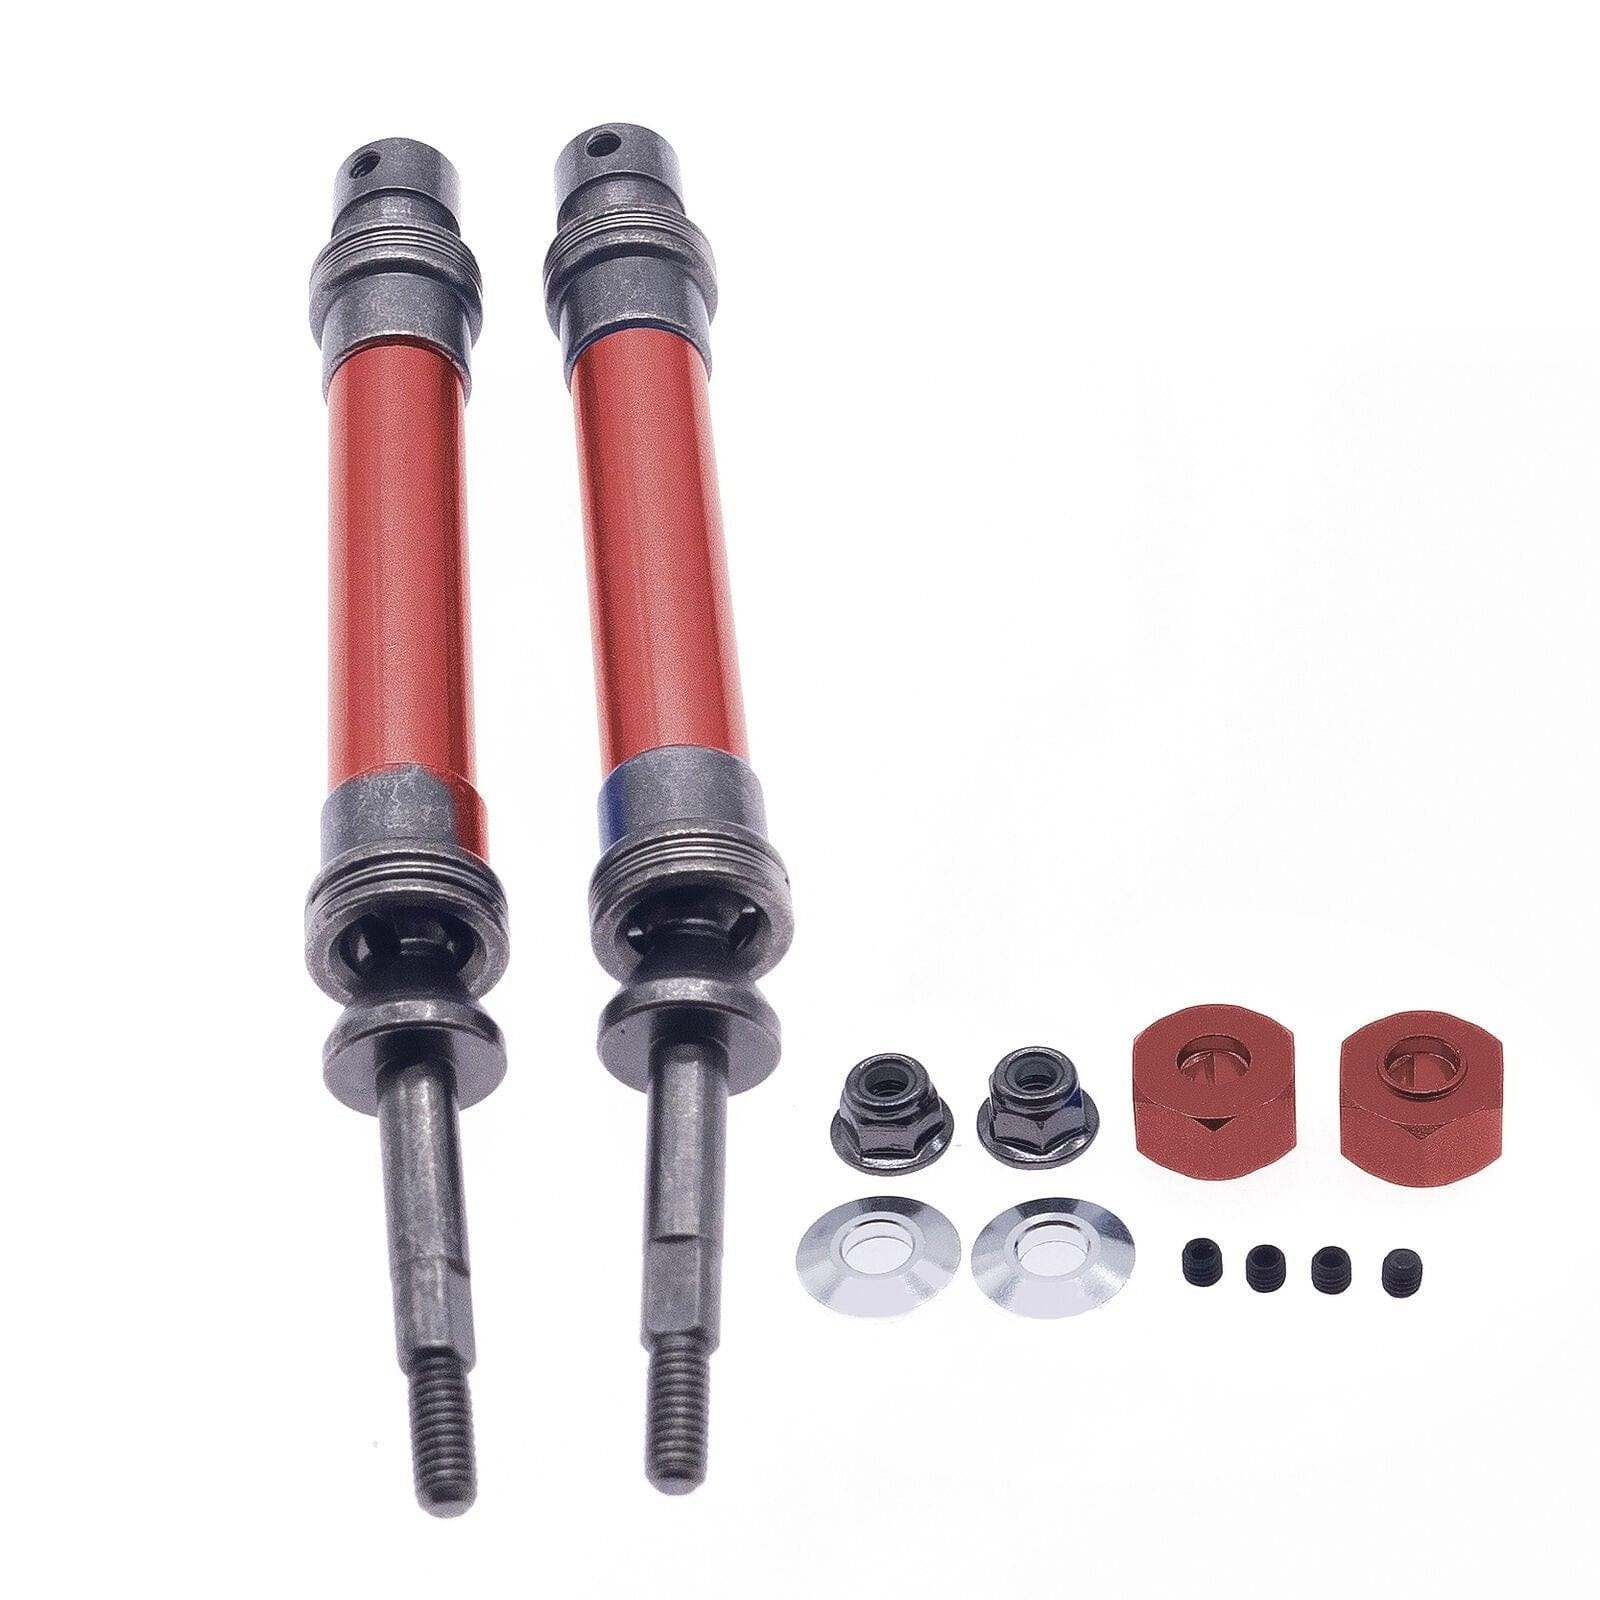 RCAWD ECX 2WD RCAWD rear drive shaft for 1/10 ECX 2WD Series AMP MT AMP DB Torment Ruckus Axe